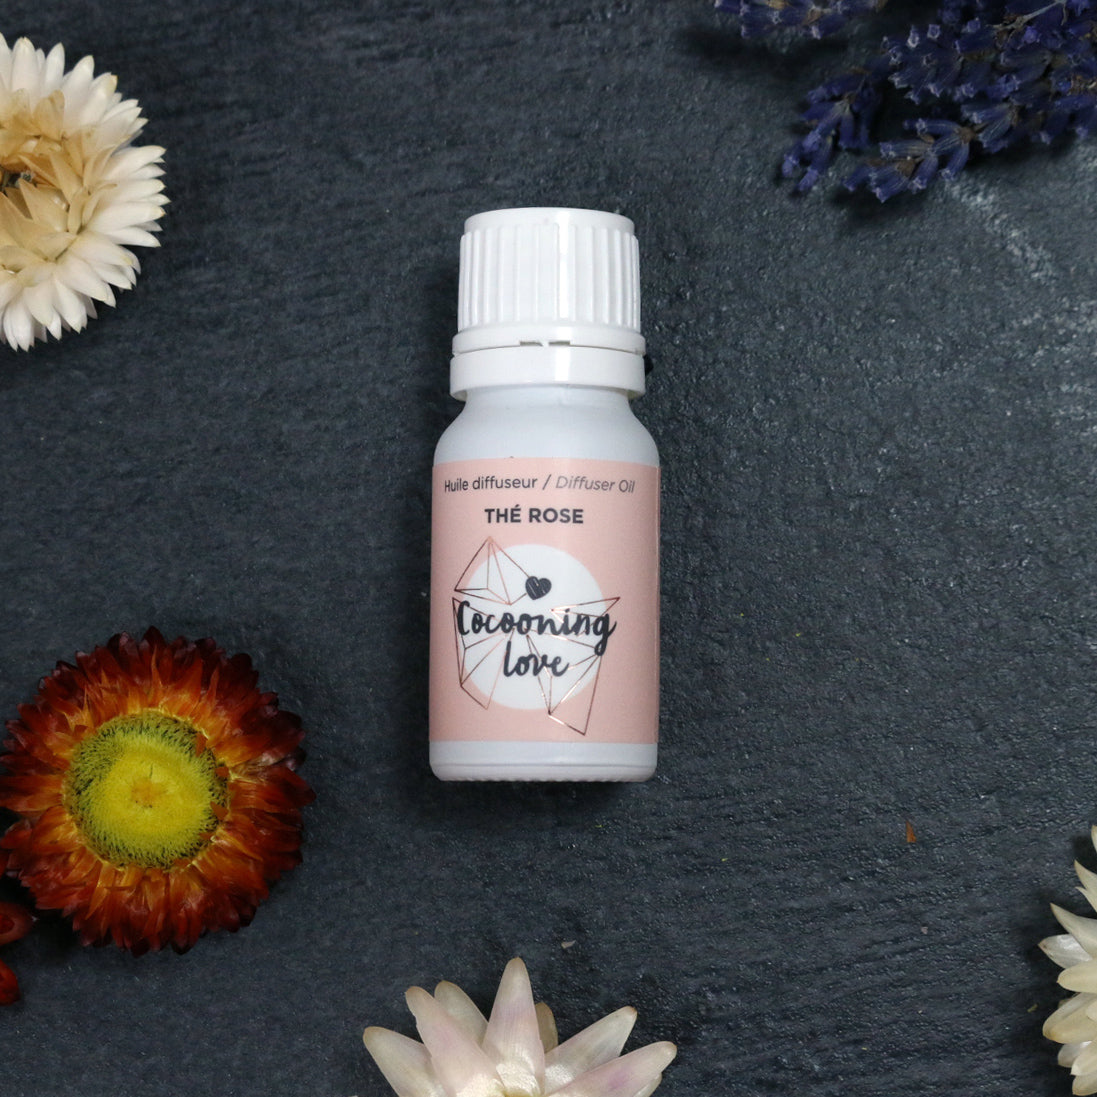 Cocooning Love - Huile pour diffuseur Thé rose